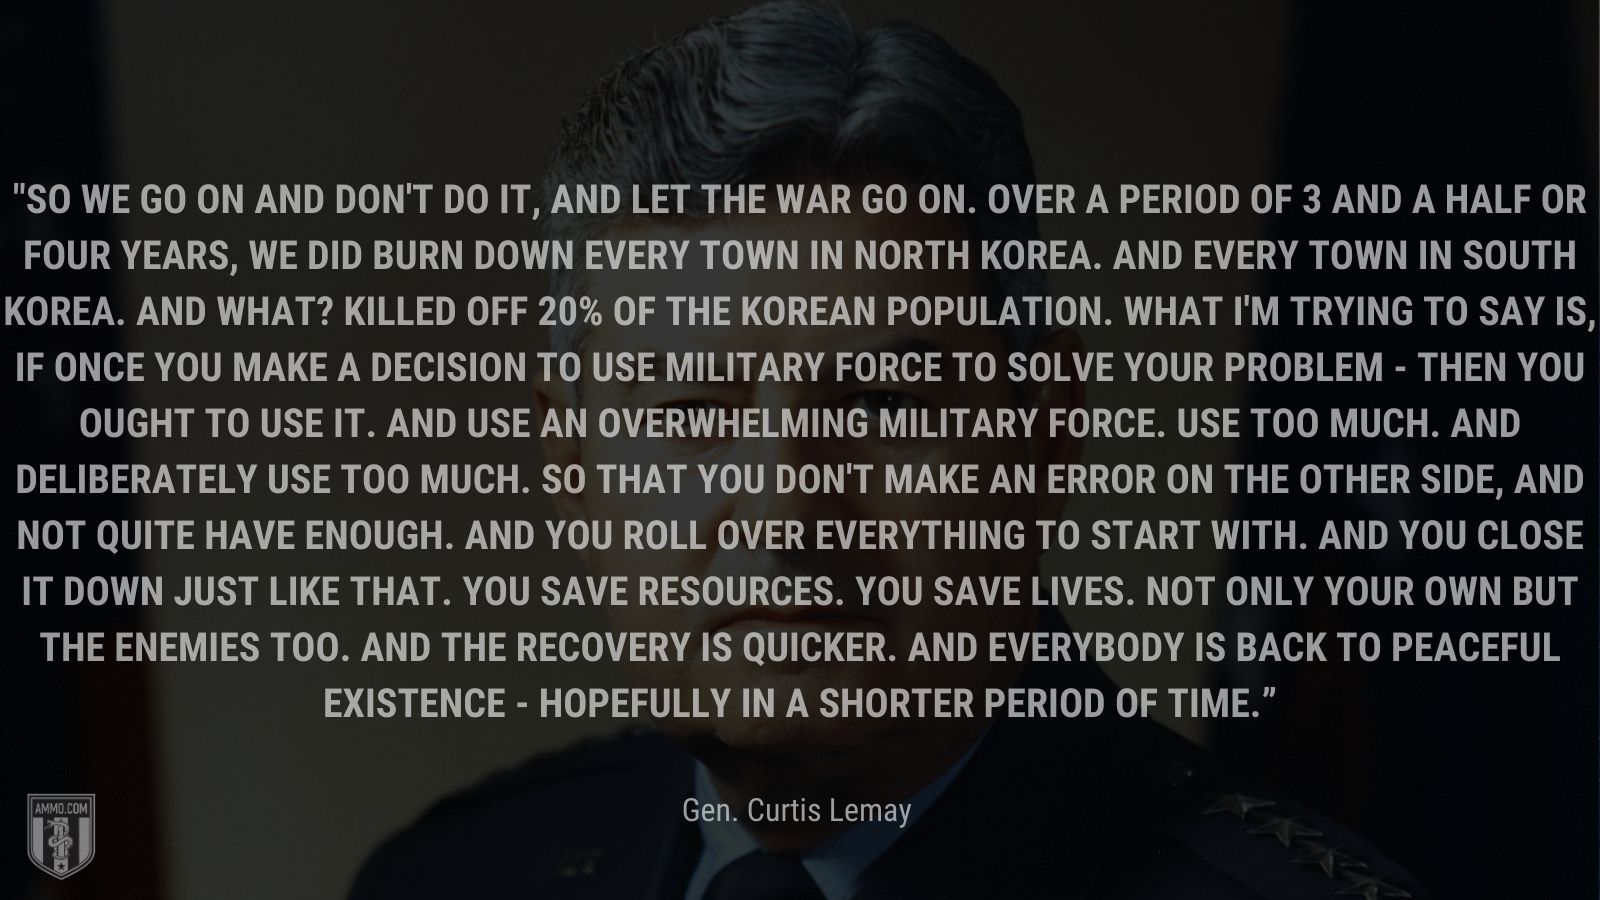 “So we go on and don't do it, and let the war go on. Over a period of 3 and a half or four years, we did burn down every town in North Korea. And every town in South Korea. And what? Killed off 20% of the Korean population. What I'm trying to say is, if once you make a decision to use military force to solve your problem - then you ought to use it. And use an overwhelming military force. Use too much. And deliberately use too much. So that you don't make an error on the other side, and not quite have enough. And you roll over everything to start with. And you close it down just like that. You save resources. You save lives. Not only your own but the enemies too. And the recovery is quicker. And everybody is back to peaceful existence - hopefully in a shorter period of time.” - Gen. Curtis Lemay